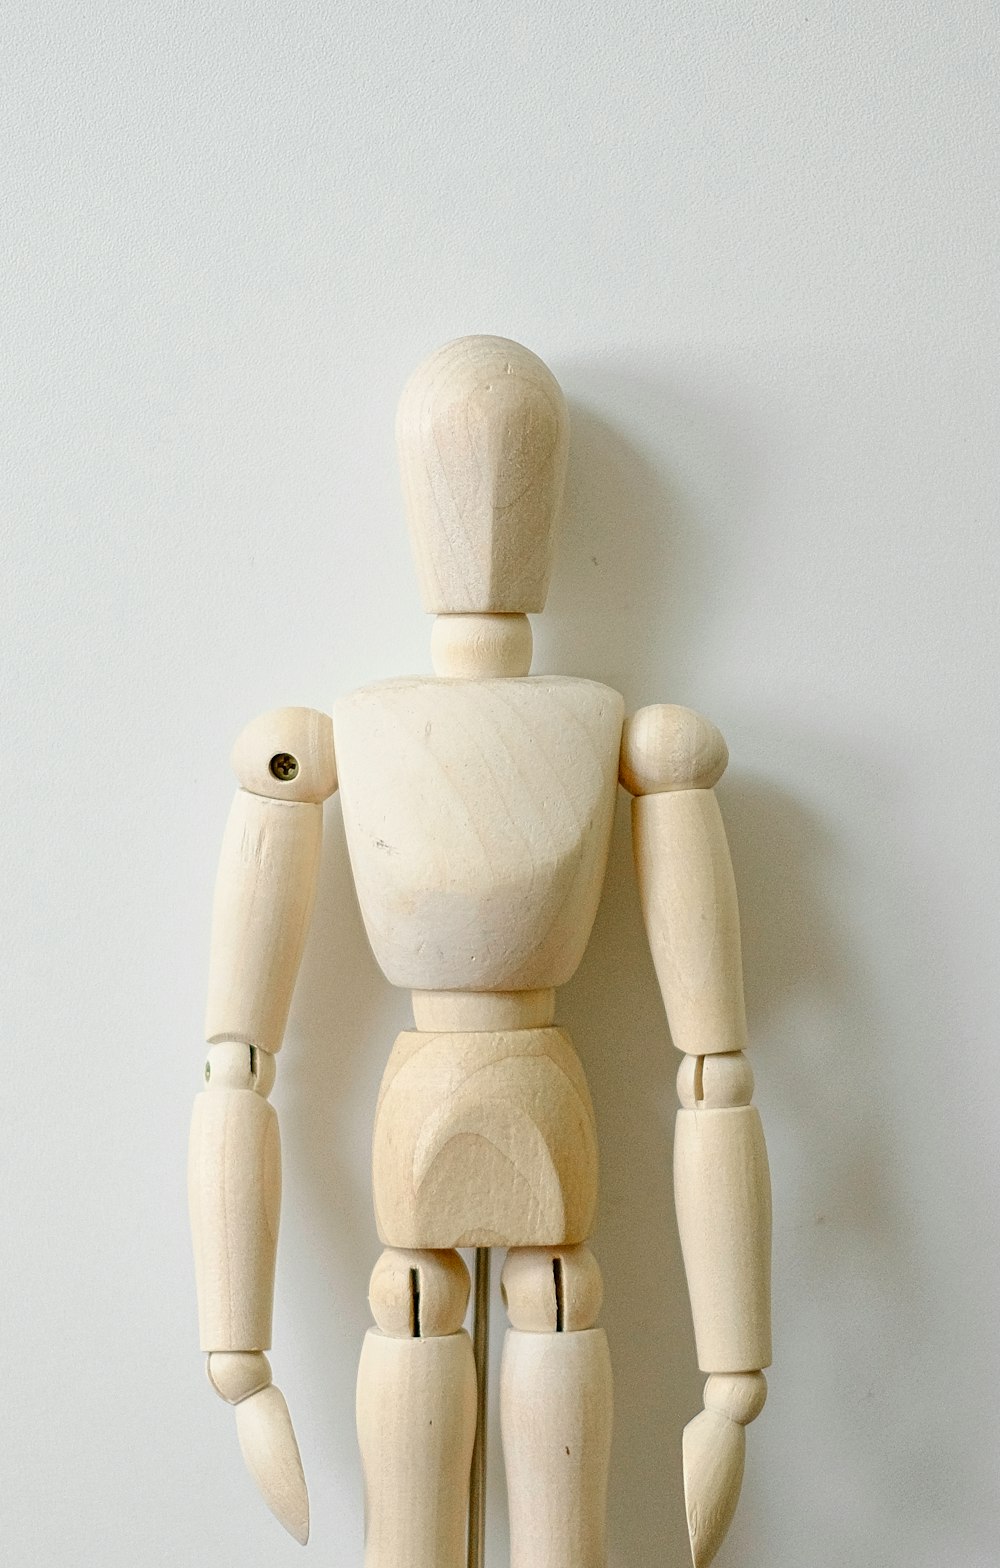 a wooden toy standing up against a white wall